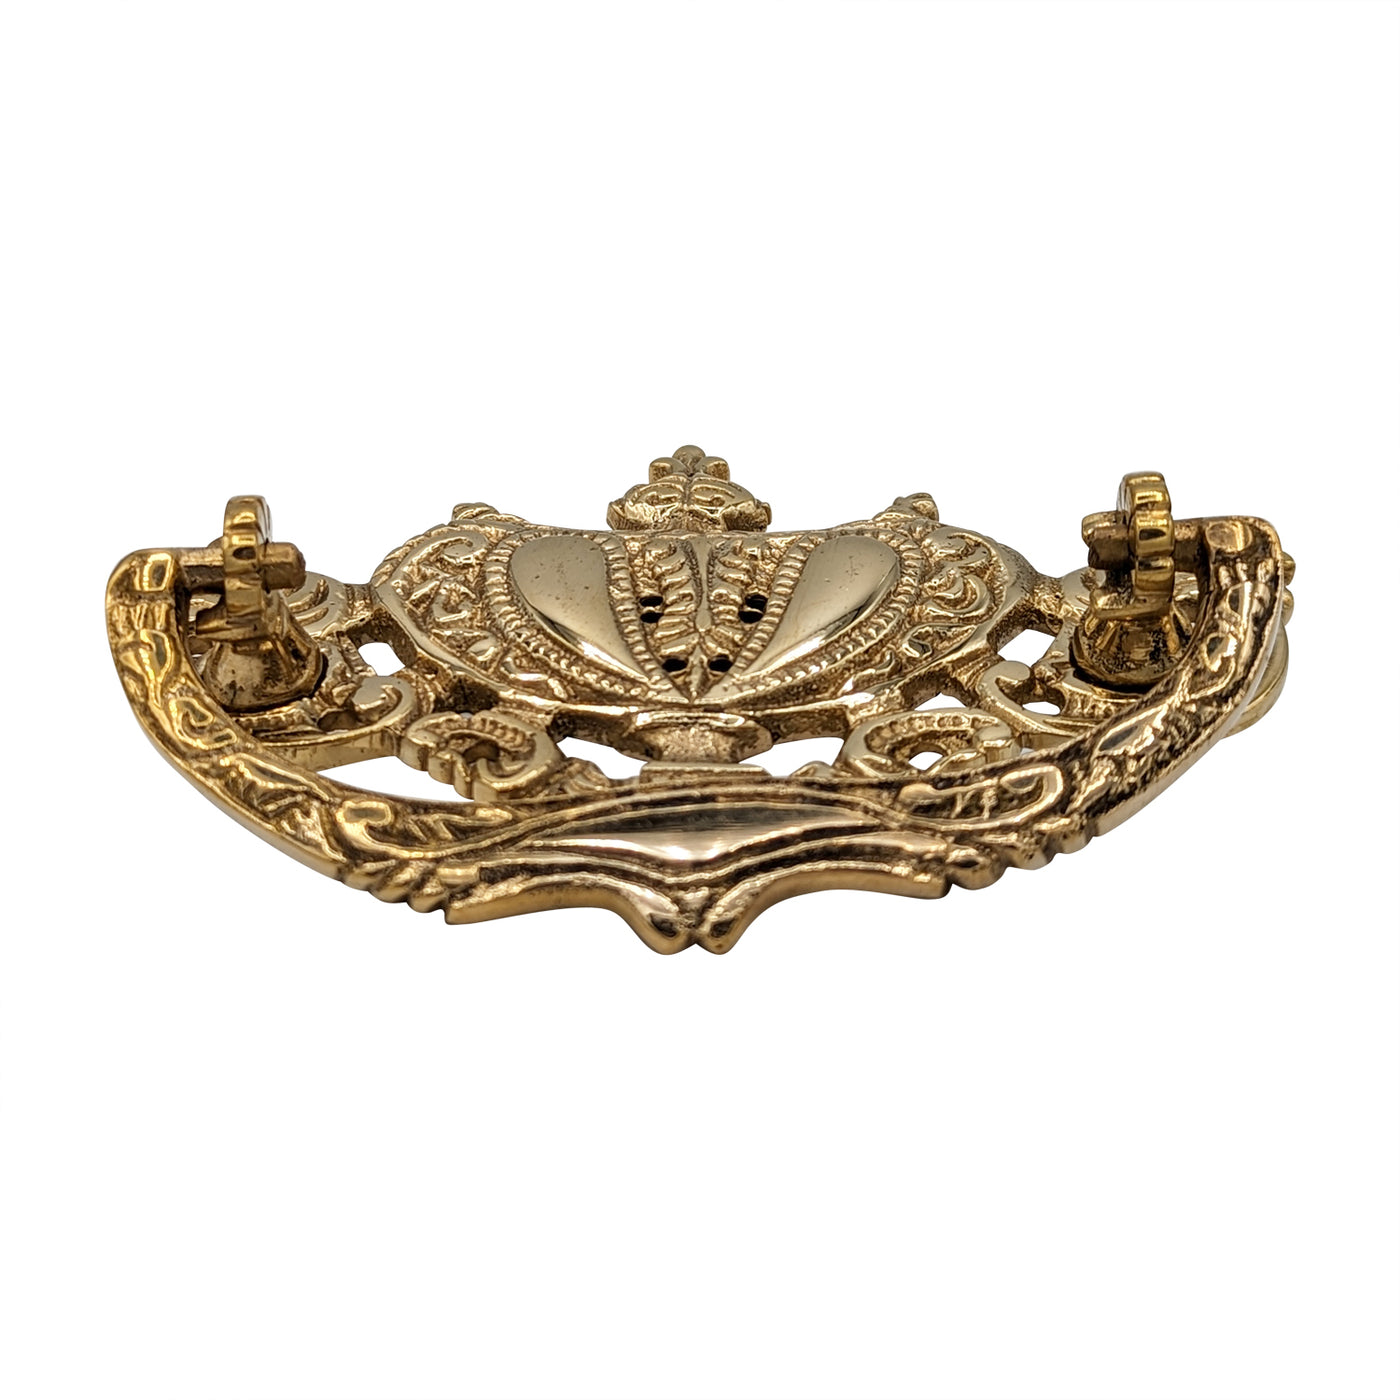 4 1/4 Inch ( 3 Inch C-C) Solid Brass Rococo Lamp Bail Pull